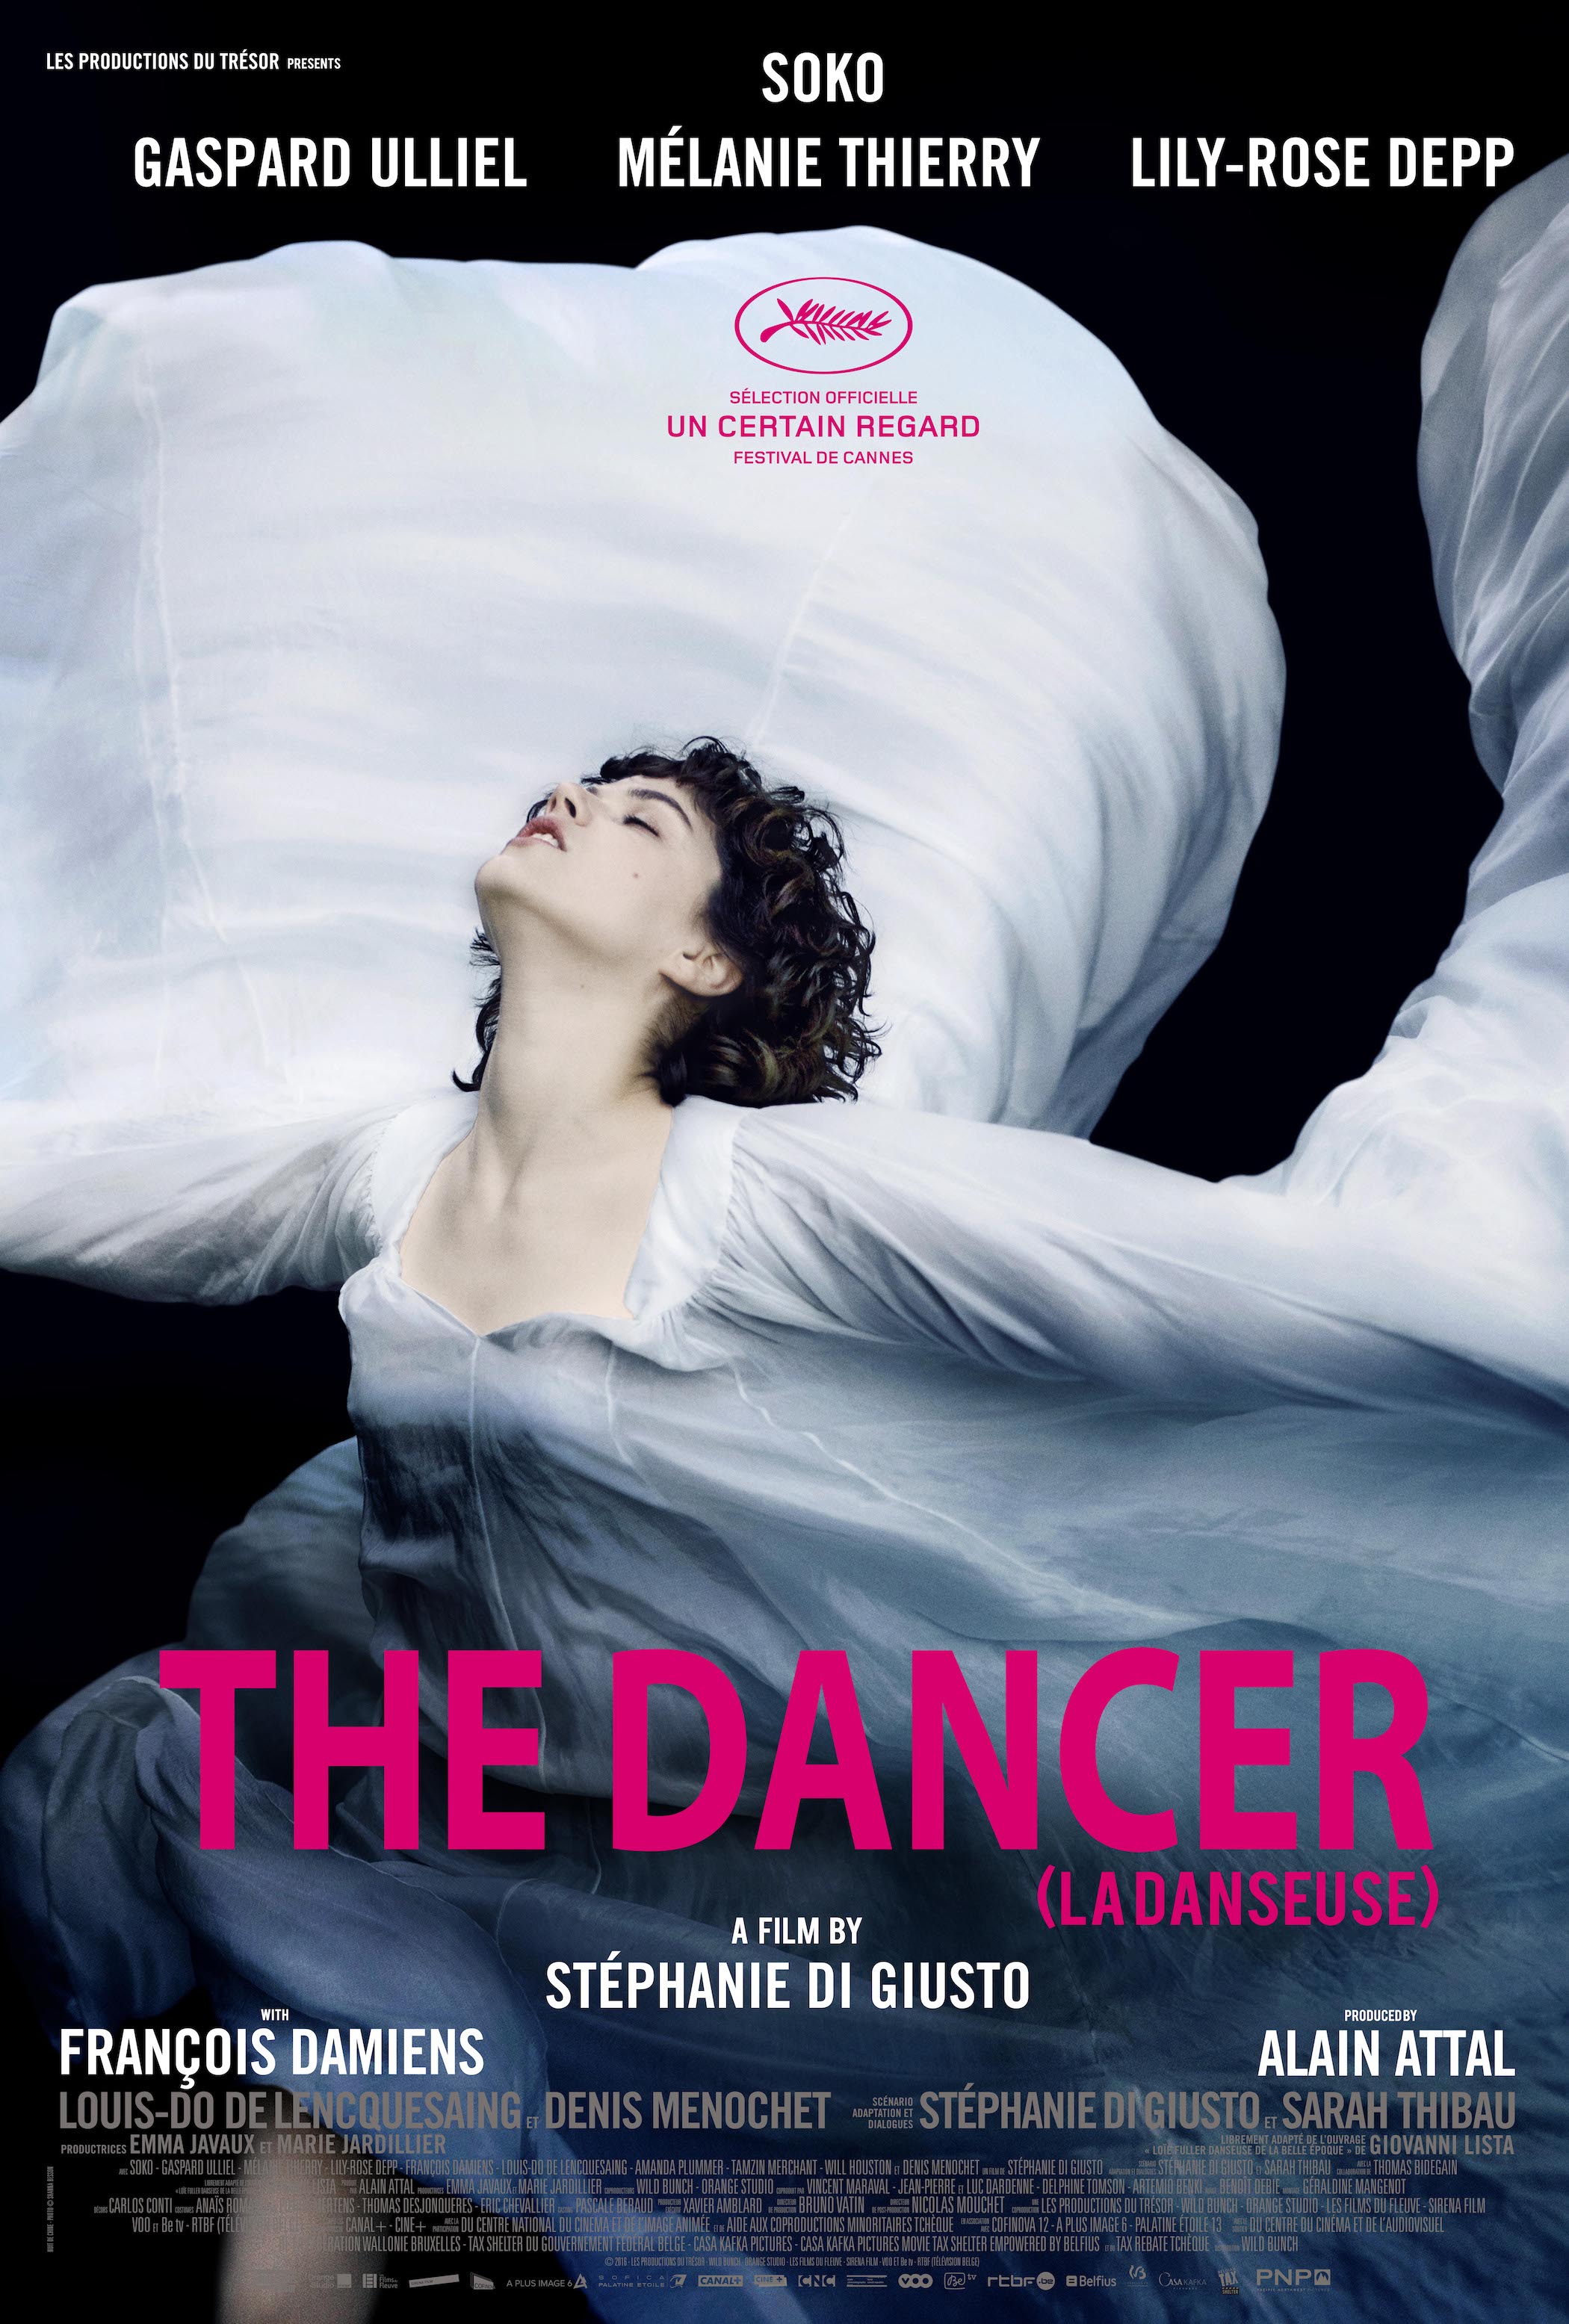 The Dancer (Review)